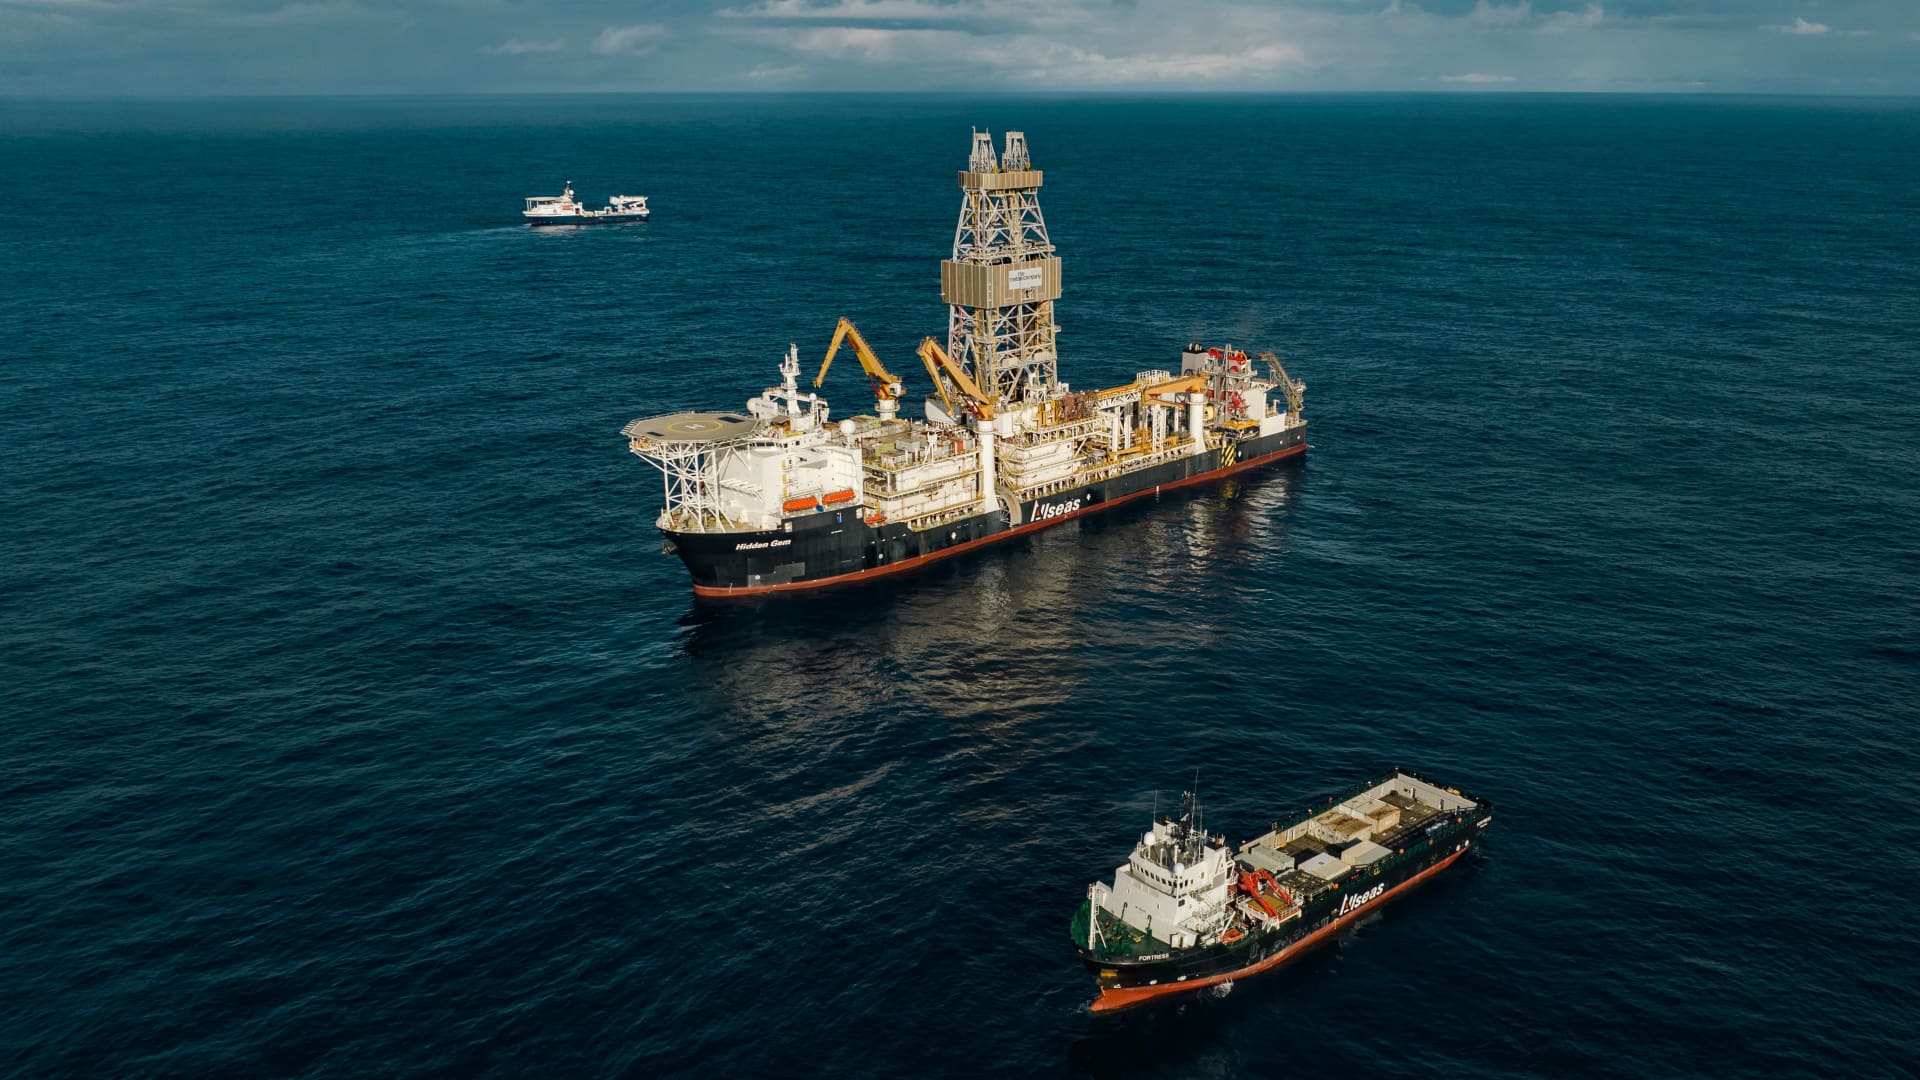 These three vessels, owned by The Metals Company's strategic partner Allseas, are seen here performing a pilot nodule collection system trial and environmental monitoring program for The Metals Company. Photo courtesy The Metals Company.